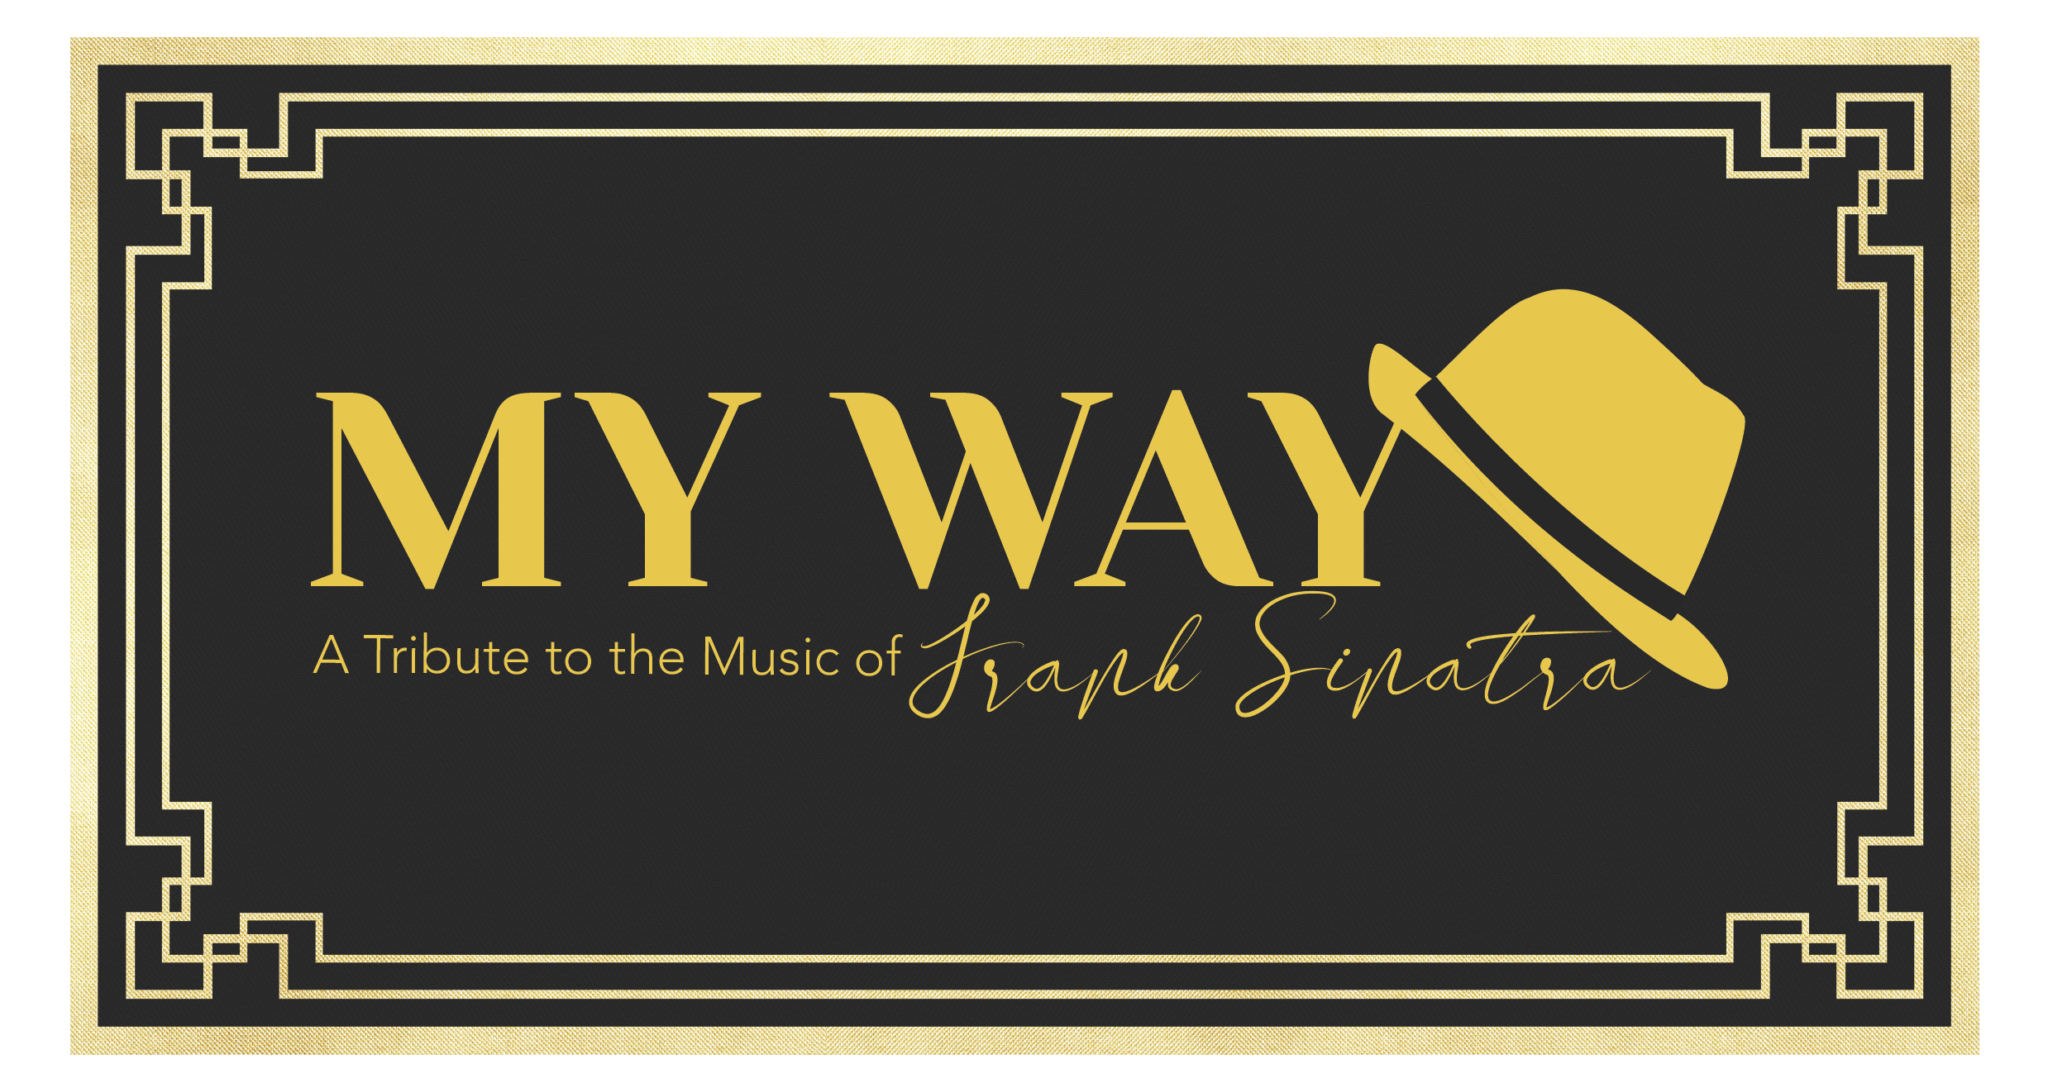 Erie Playhouse presents My Way: A Tribute to the Music of Frank Sinatra